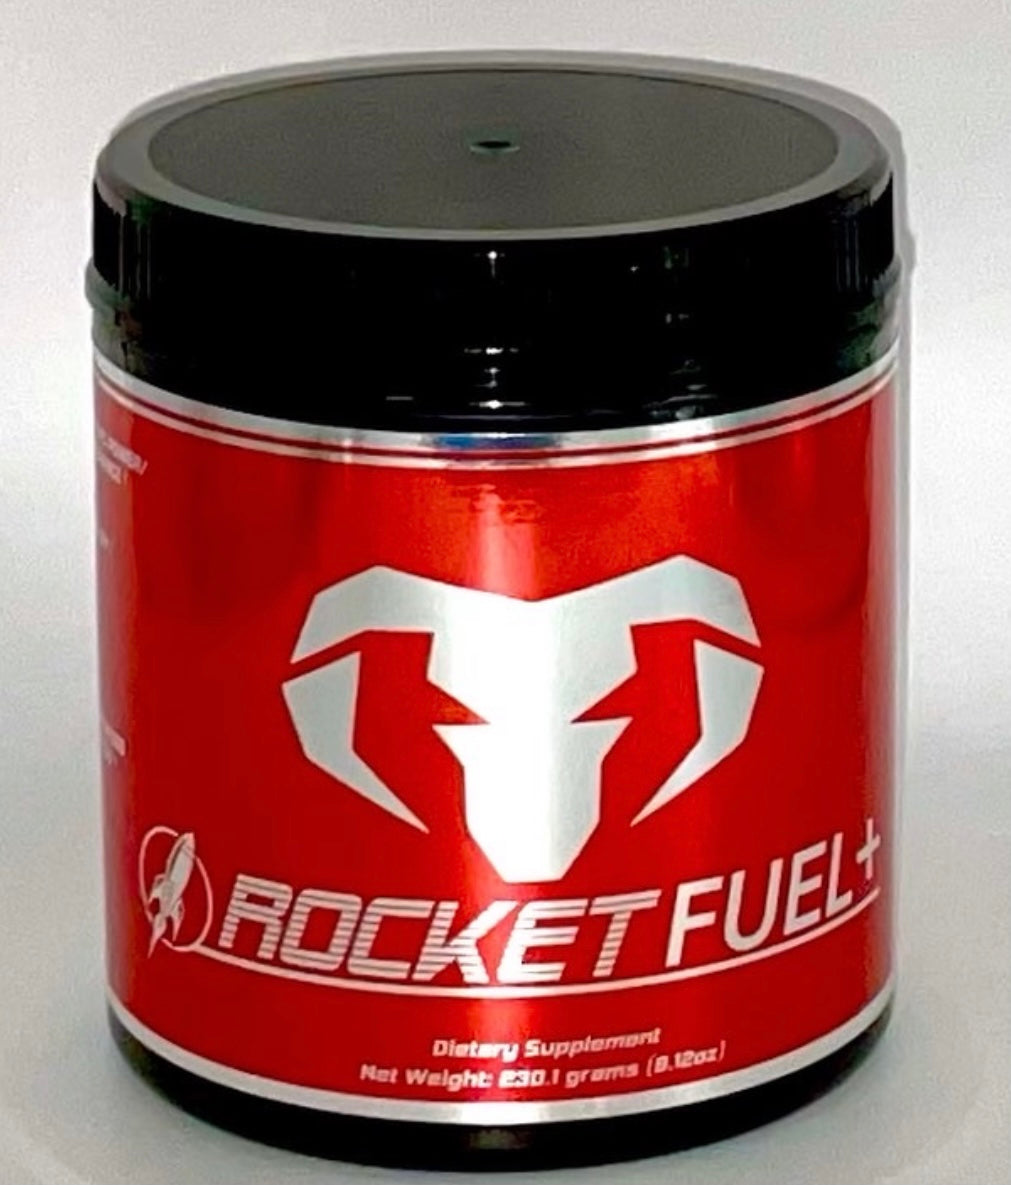 4Arm Strong & Rocket Fuel + package deal, FREE SHIPPING